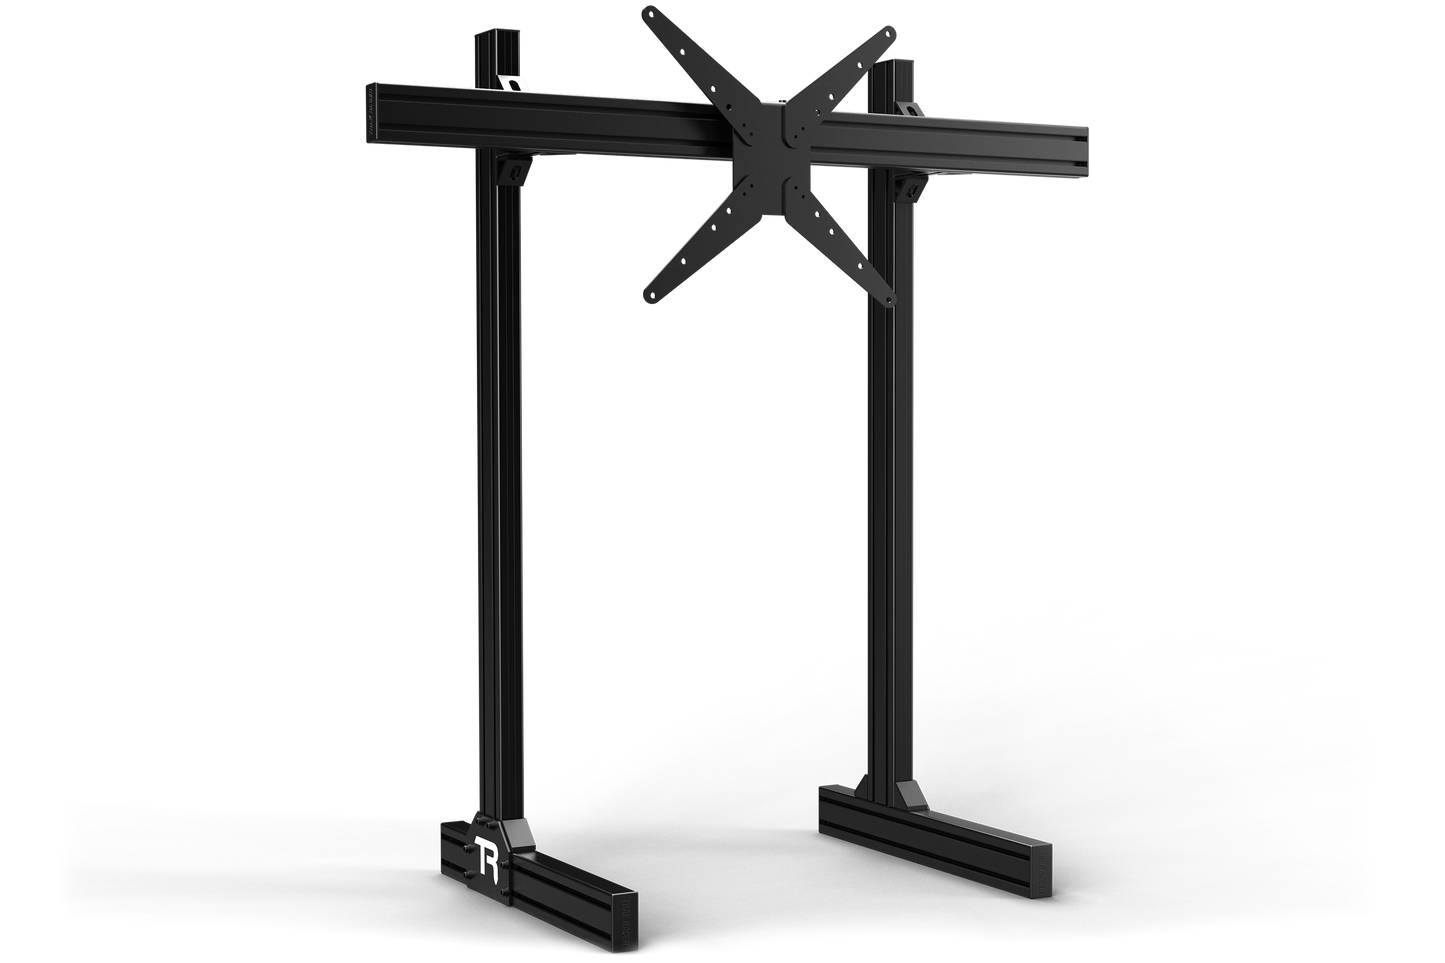 Trak Racer Freestanding Single Monitor Stand - up to 80" Display